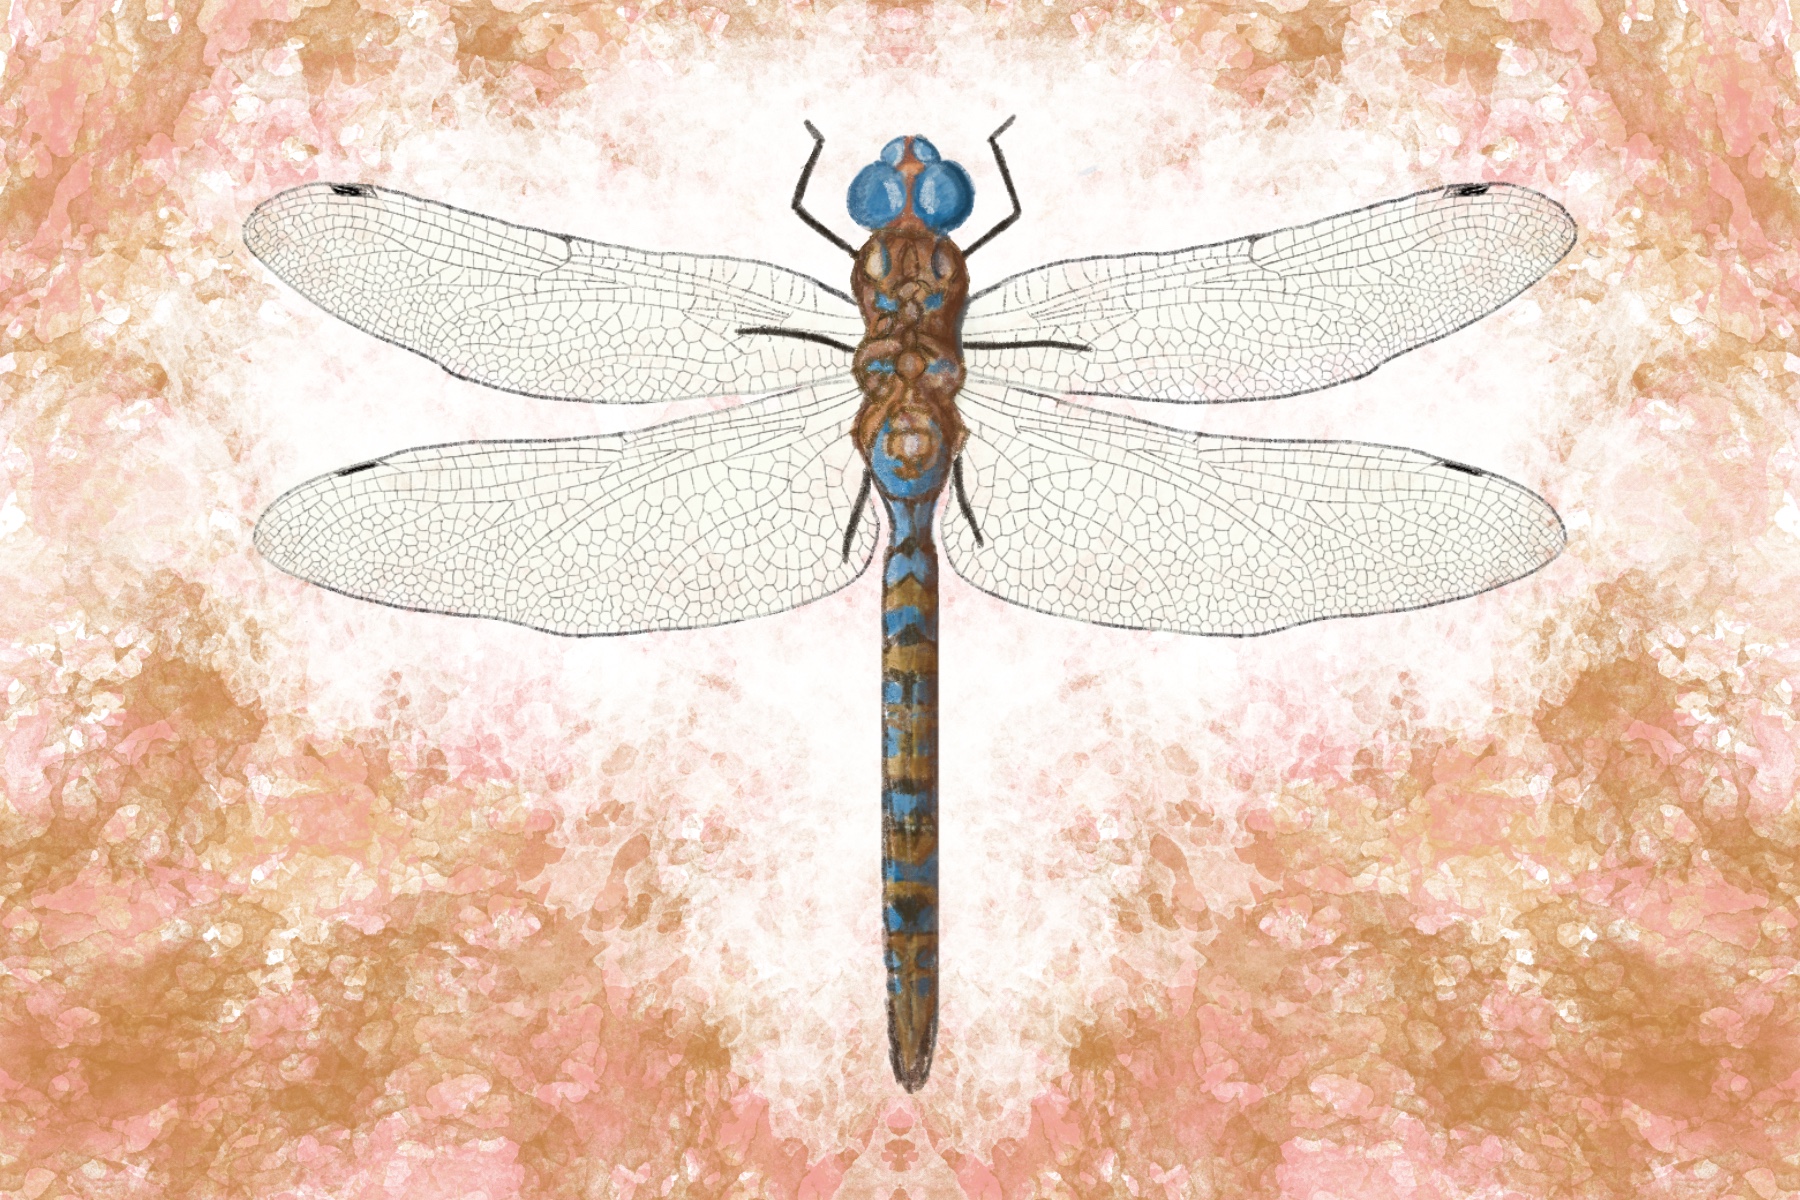 Illustration of a dragonfly.